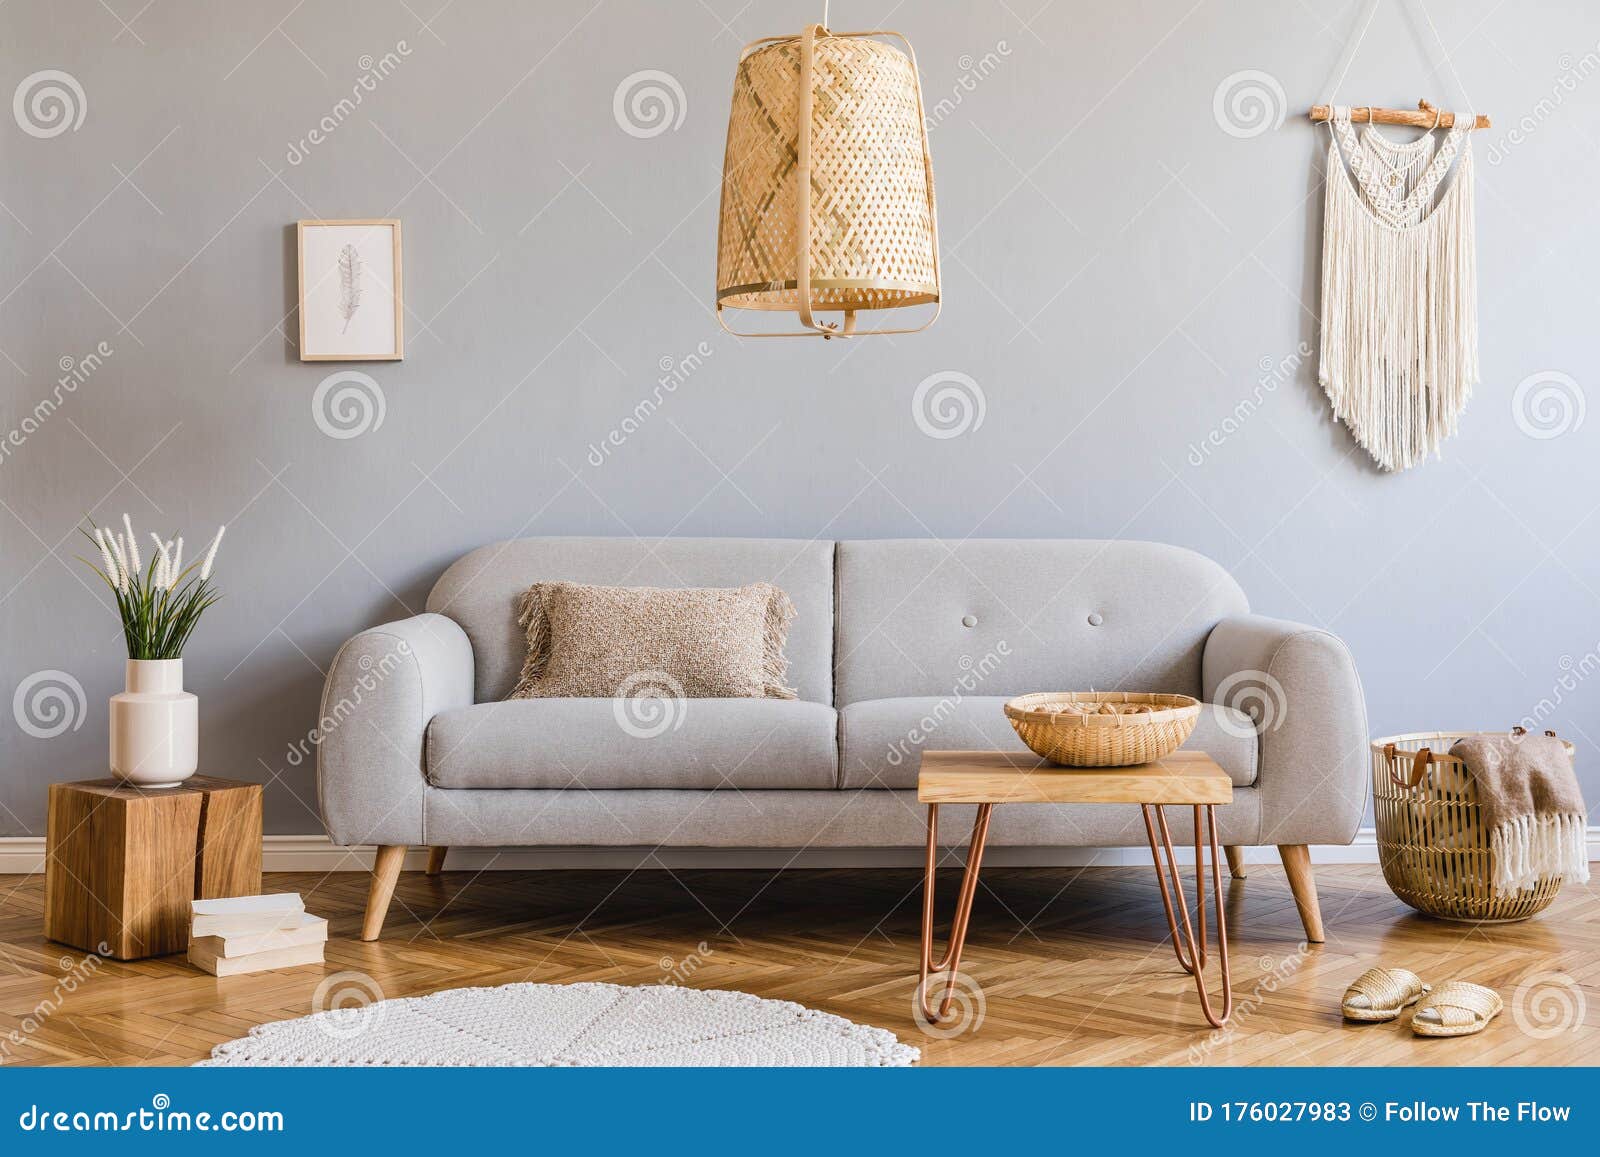 Boho Living Room With Grey Sofa And Natural Accessories Cosy Home Decor Stock Image Image Of Desk